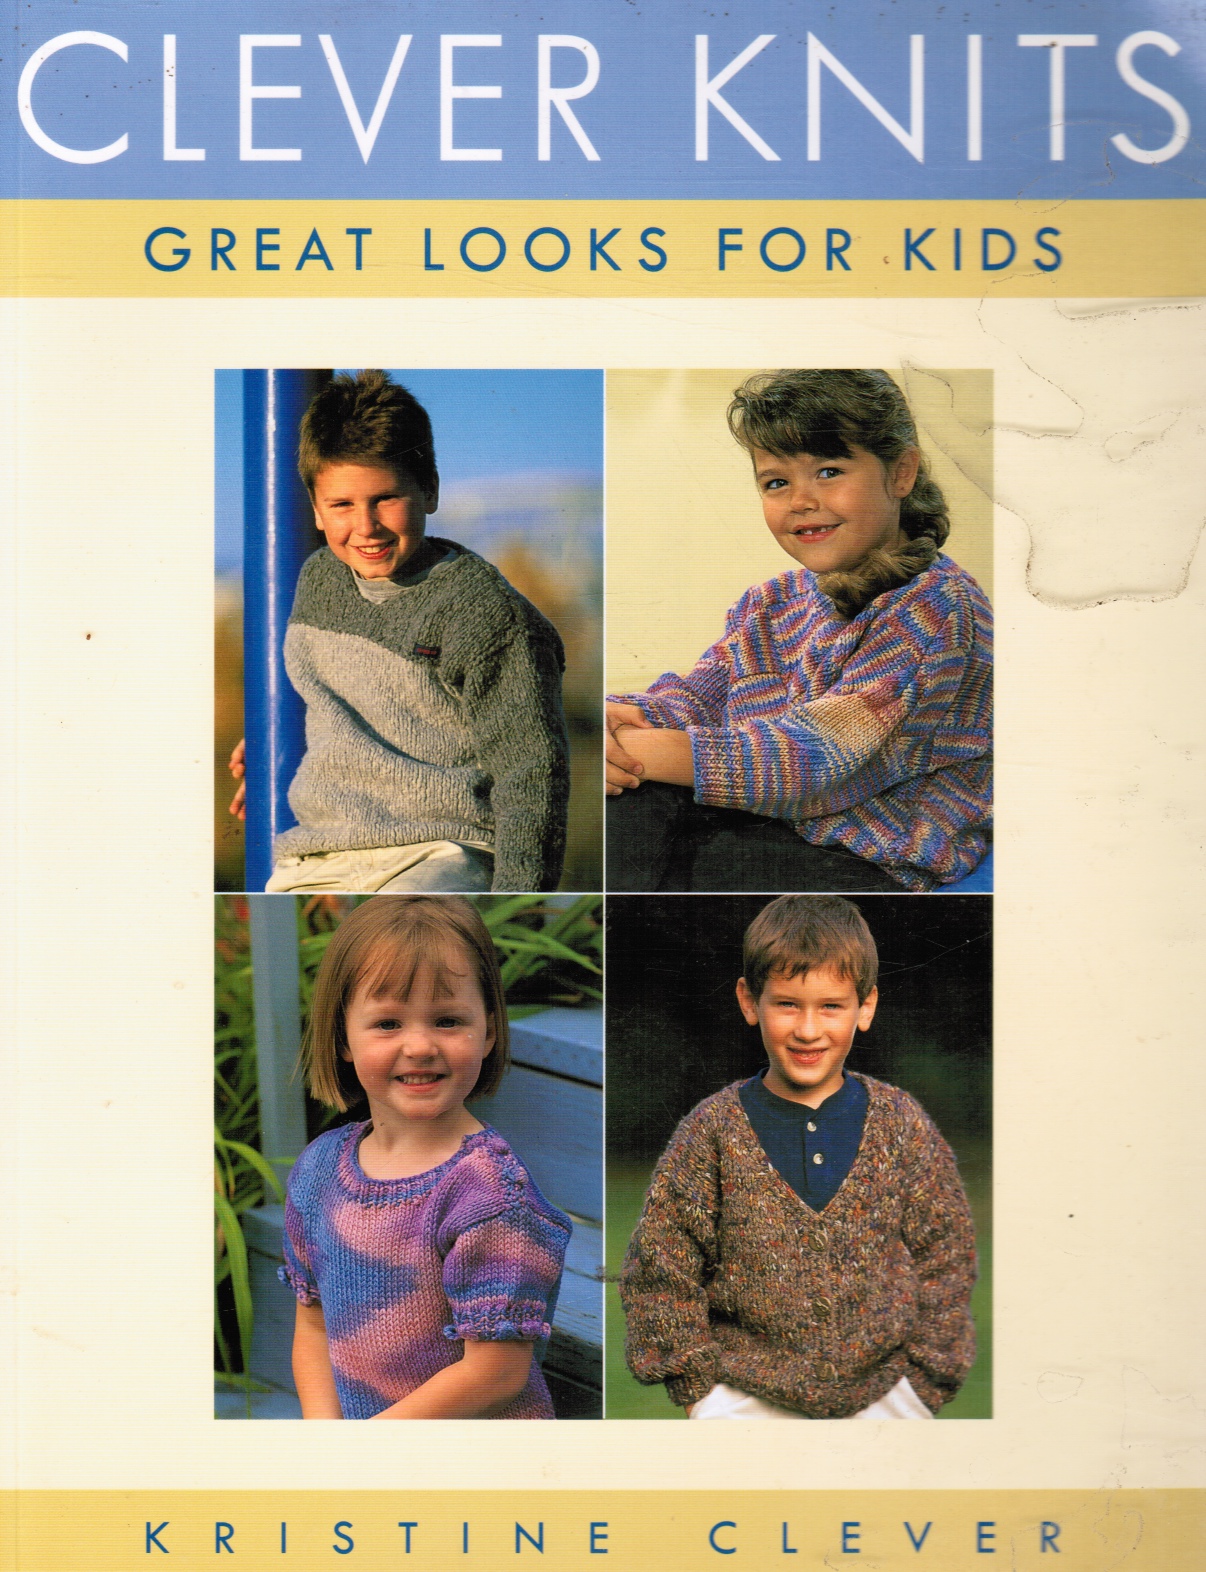 CLEVER, KRISTINE - Clever Knits: Great Looks for Kids